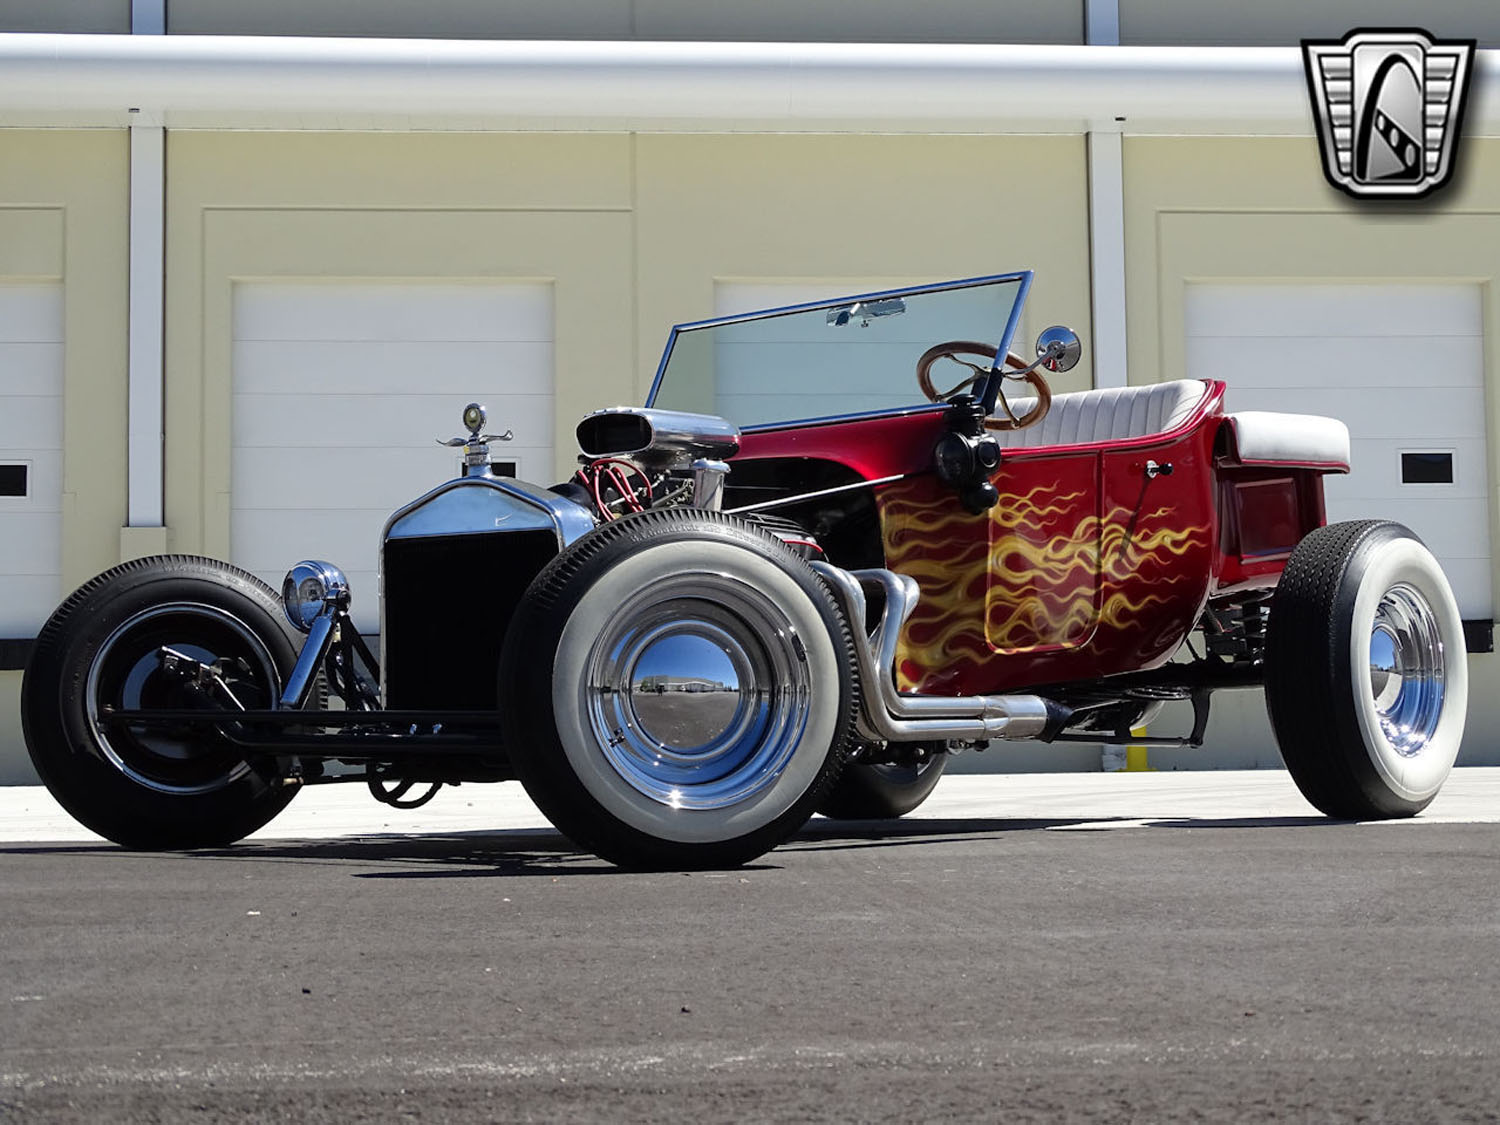 Ford T Bucket Roadster Has A 289 V8 And Flames: Video